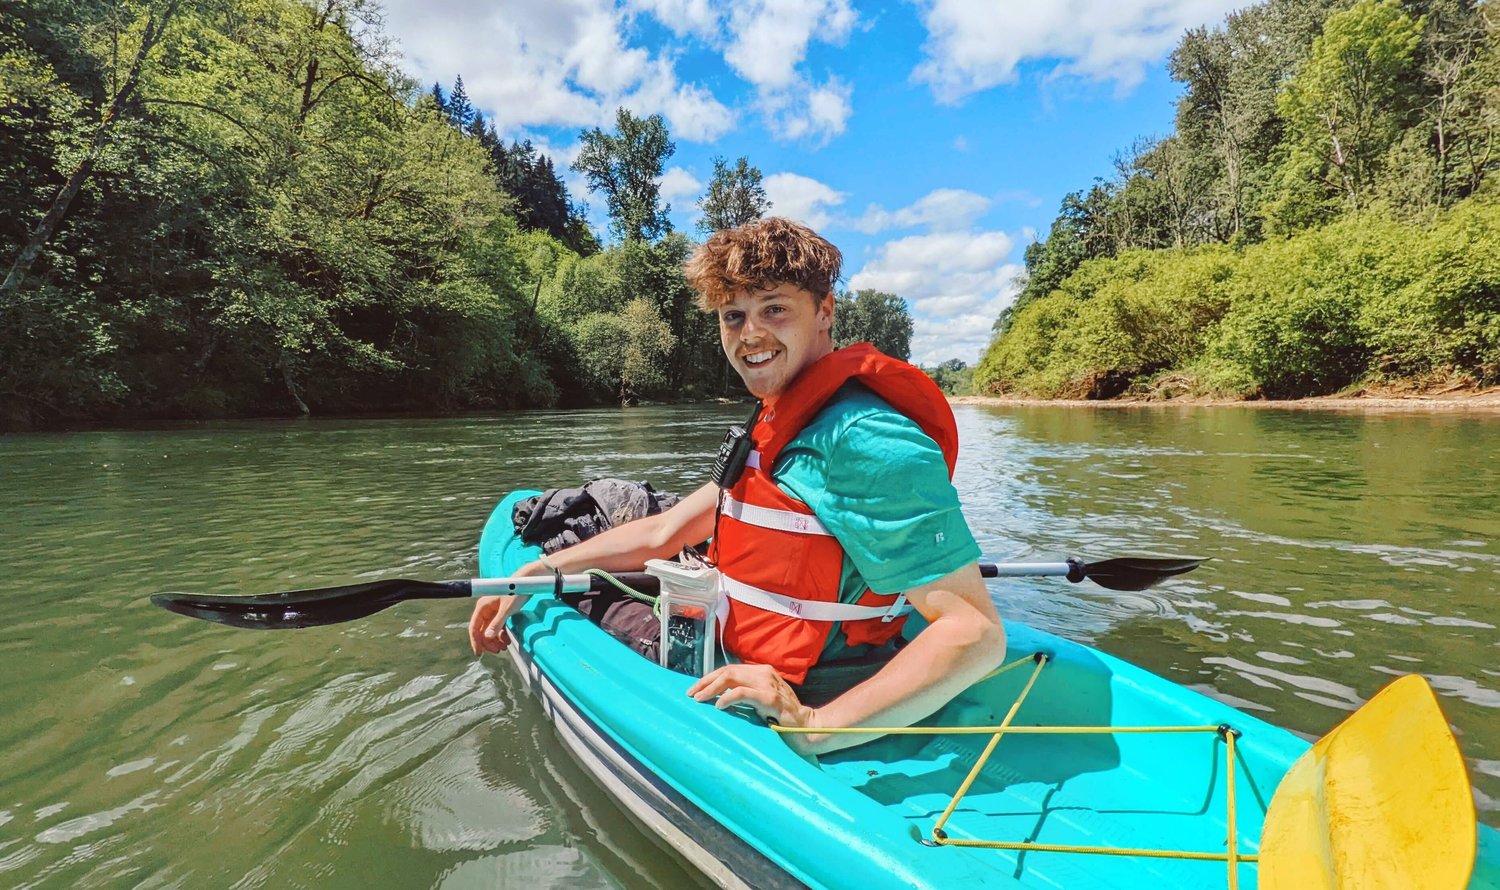 Chronicle Photojournalist Jared Wenzelburger looks to Reporter Isabel Vander Stoep as she snaps a photo while kayaking the Chehalis River near Centralia.